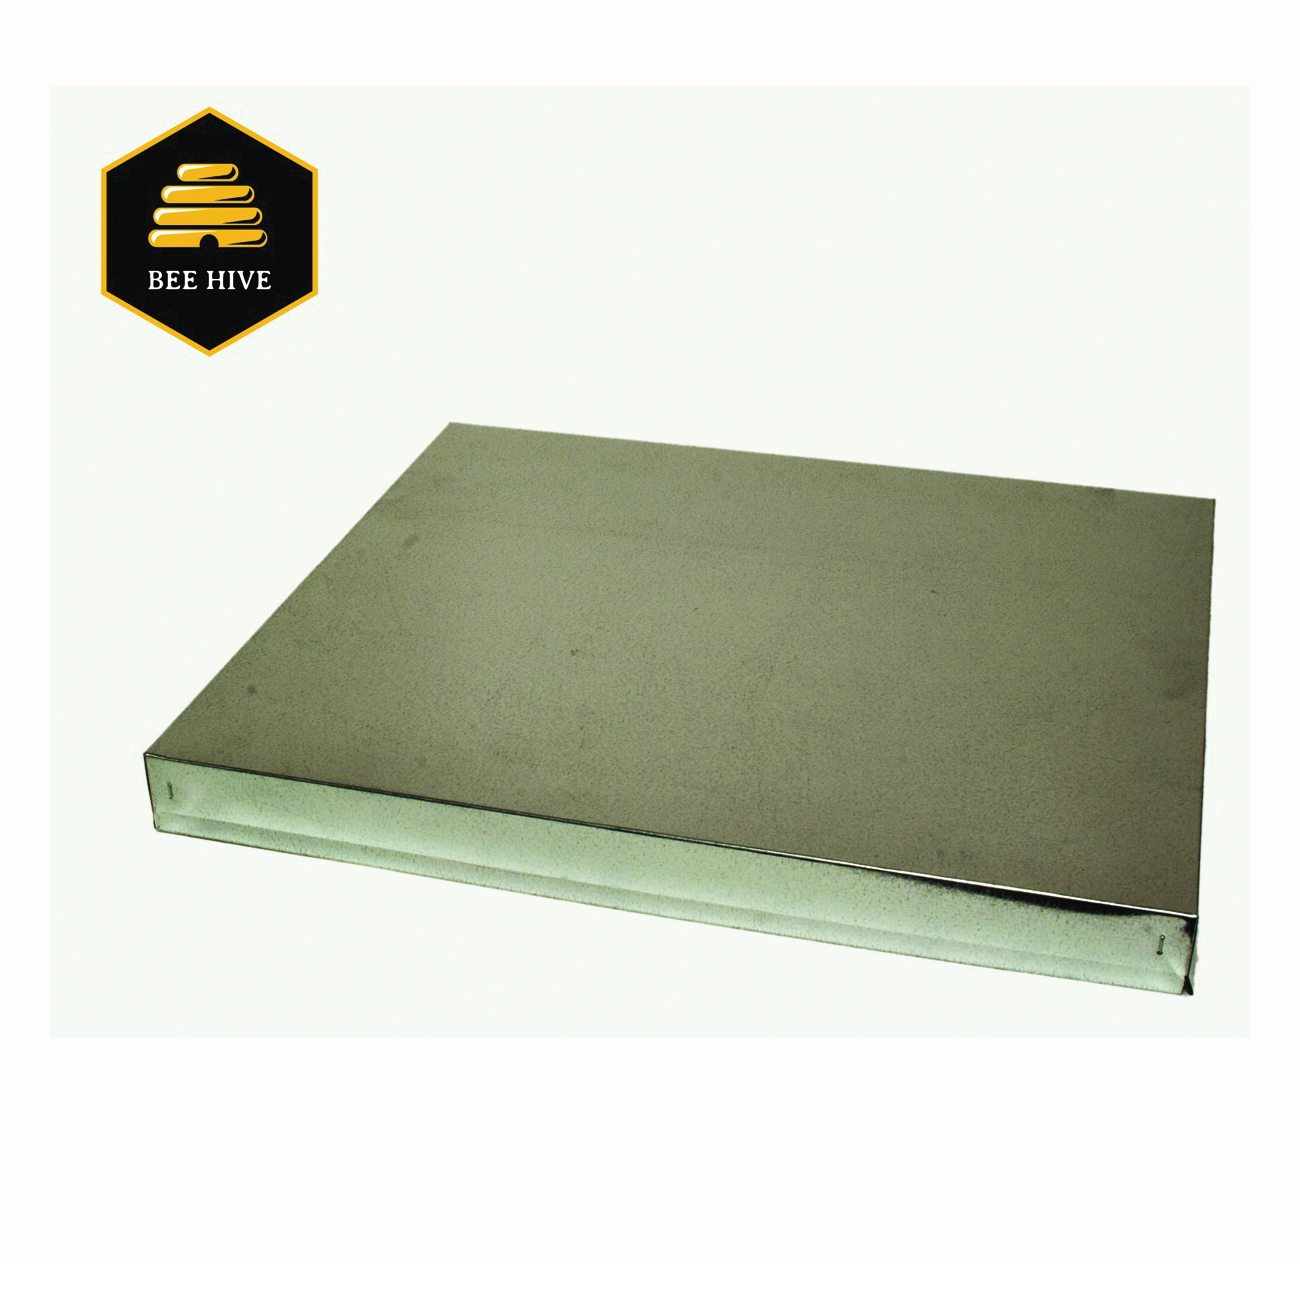 WWTF-101 Wasatch Top, Flat, Metal, For: 10 Frame Langstroth Hives